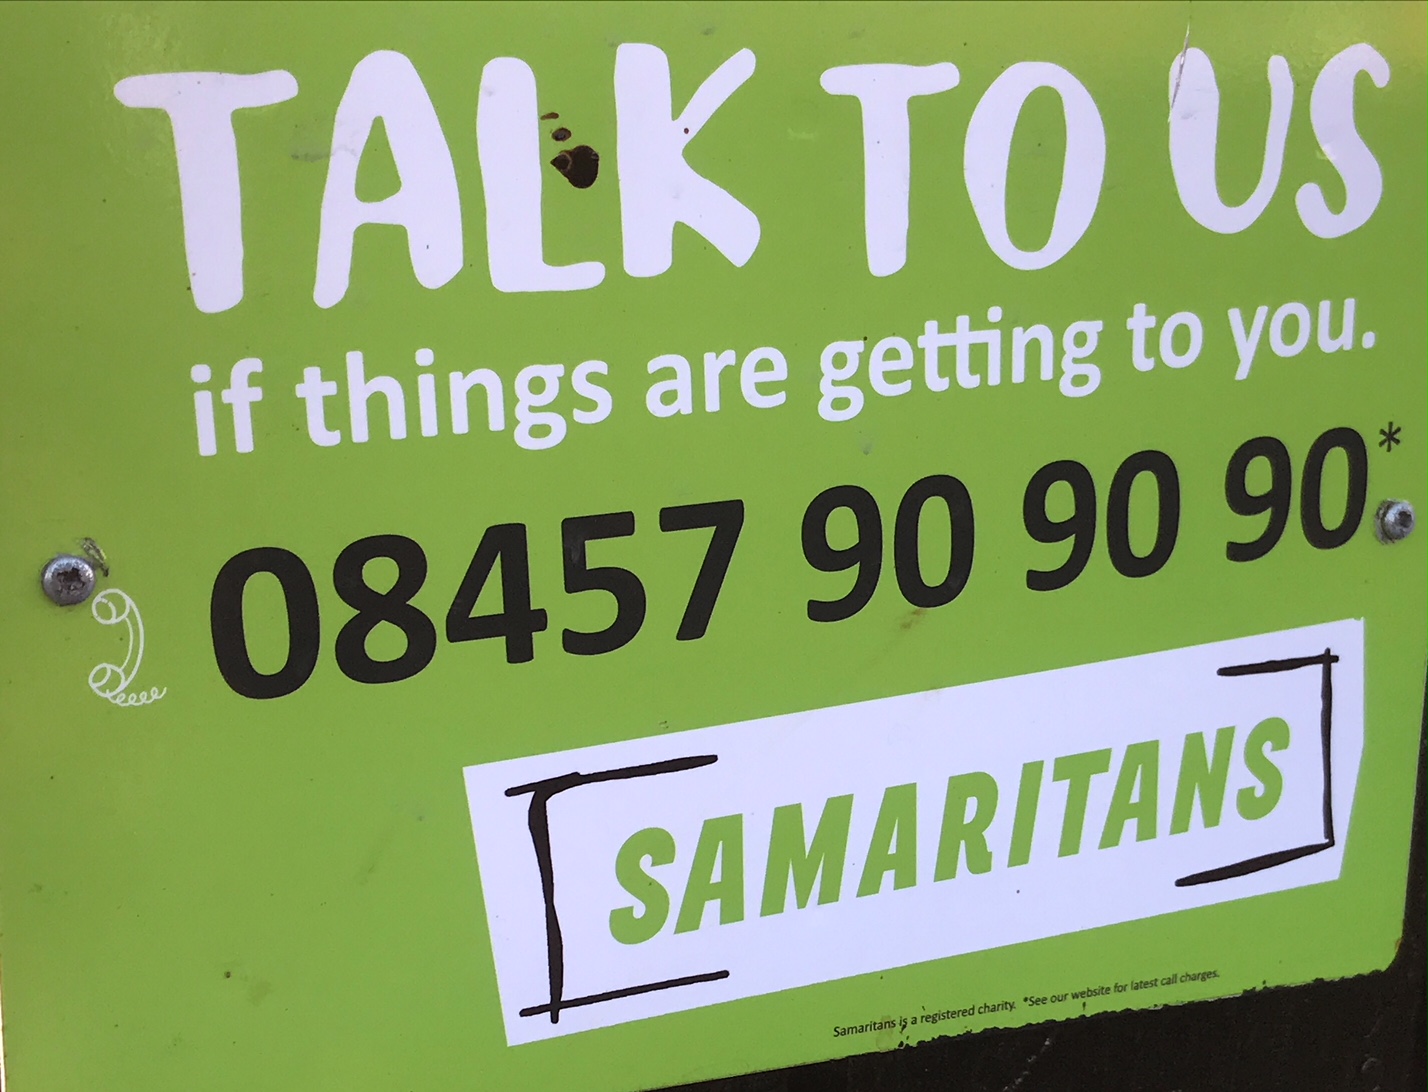 Small Talk Saves Lives: Samaritans' Poster "Talk to us if things are getting to you."